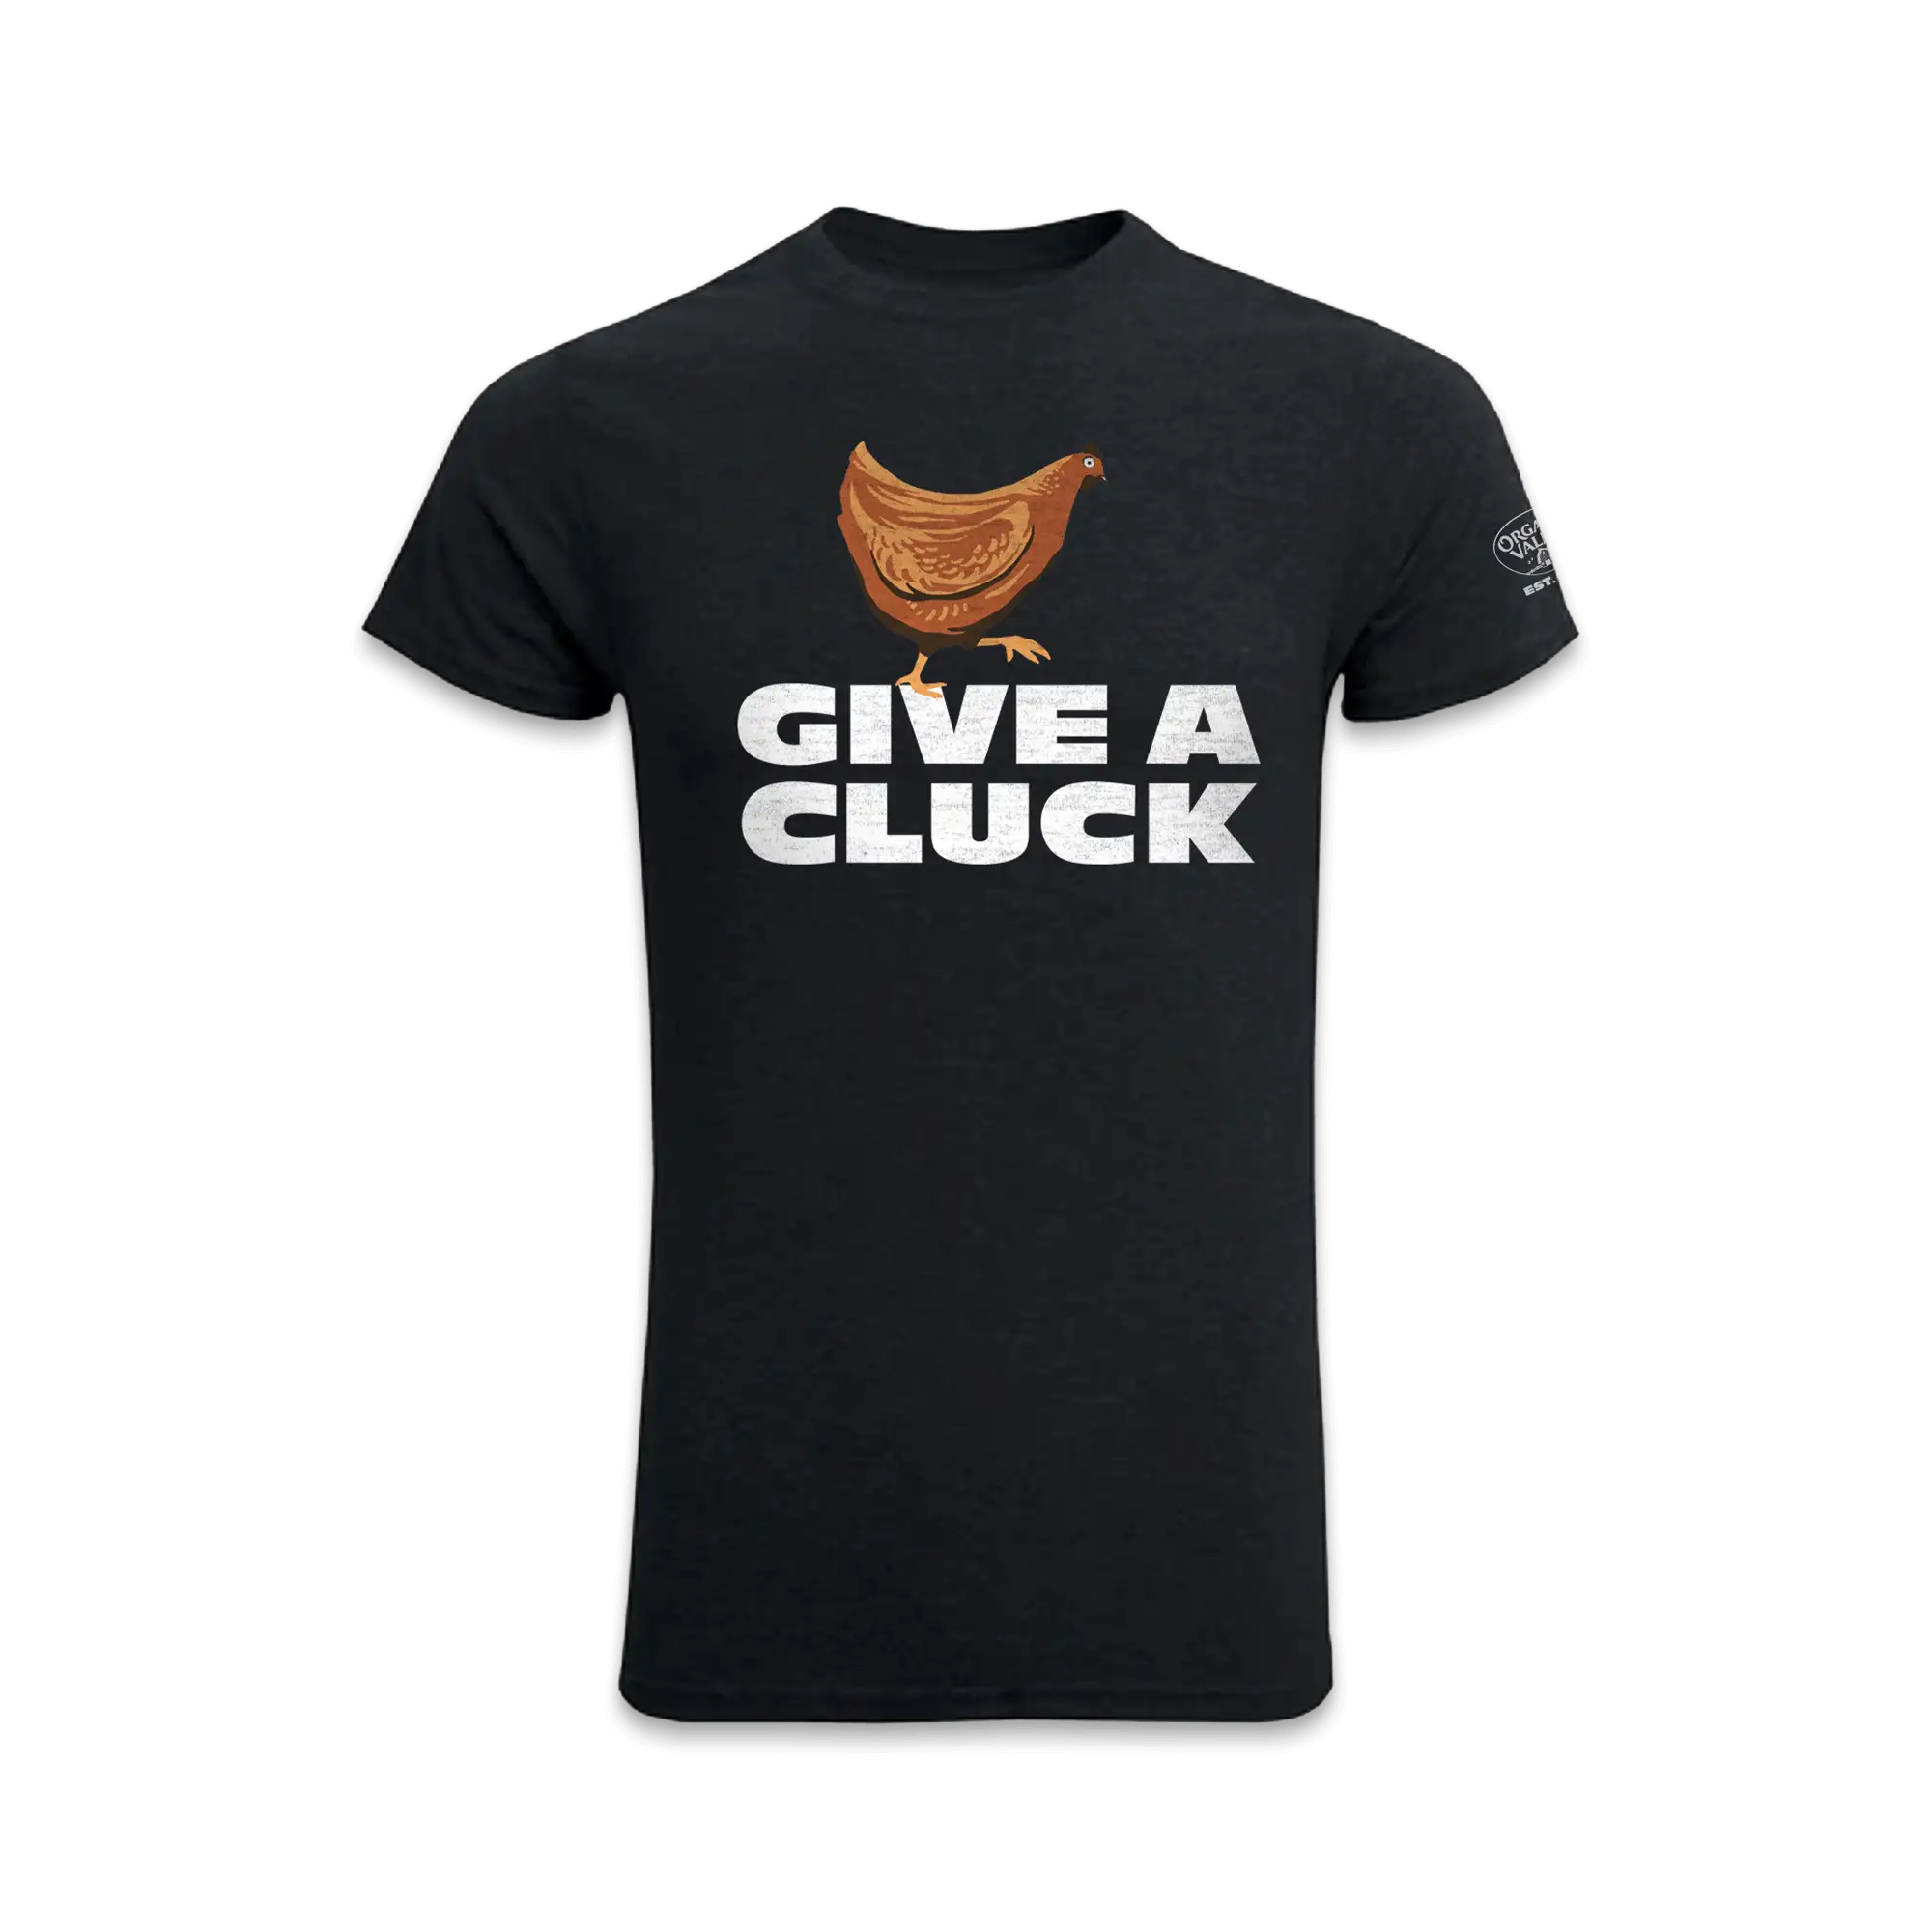 Visit the Give A Cluck Tee Product Page